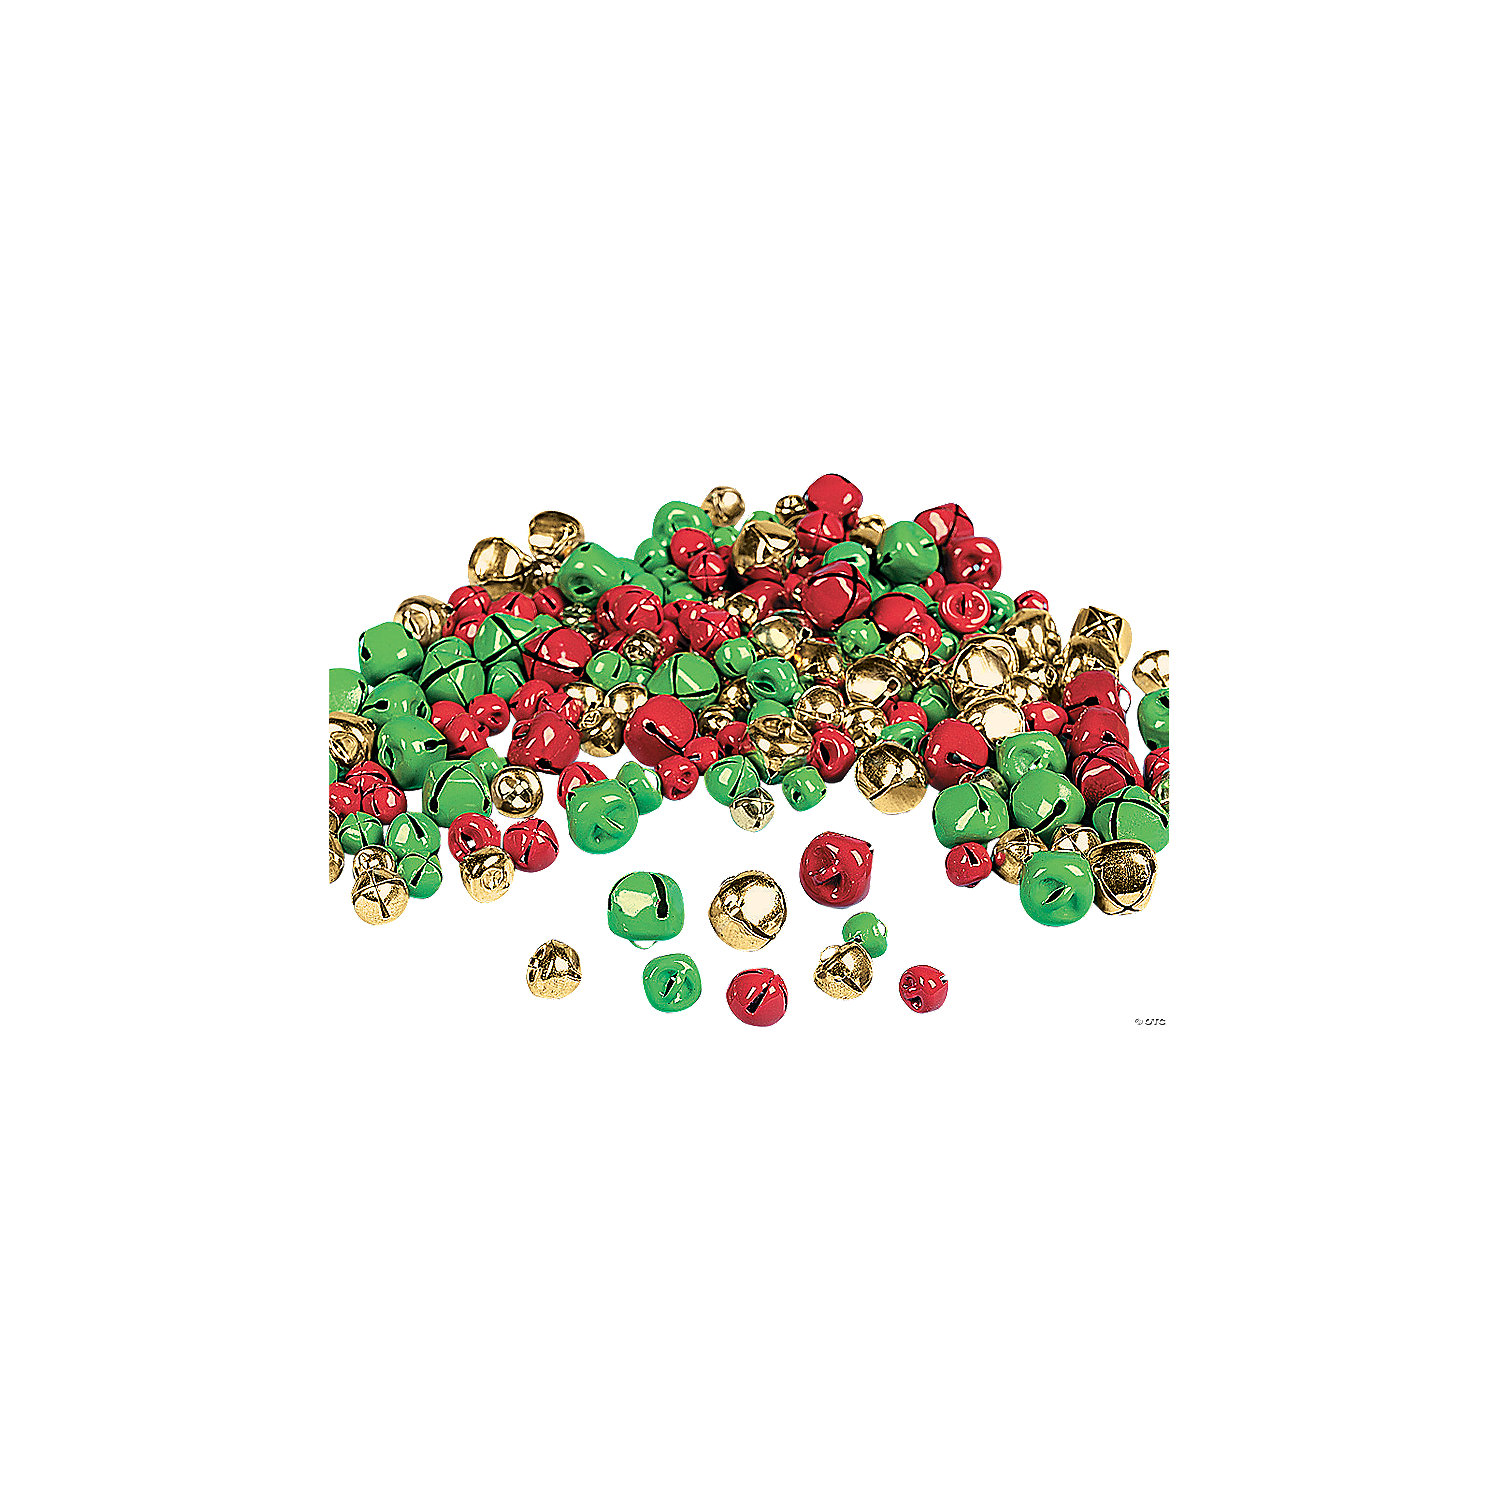 LARGE FESTIVE COLORFUL HOLIDAY CHRISTMAS JINGLE BELLS 24 Pack 